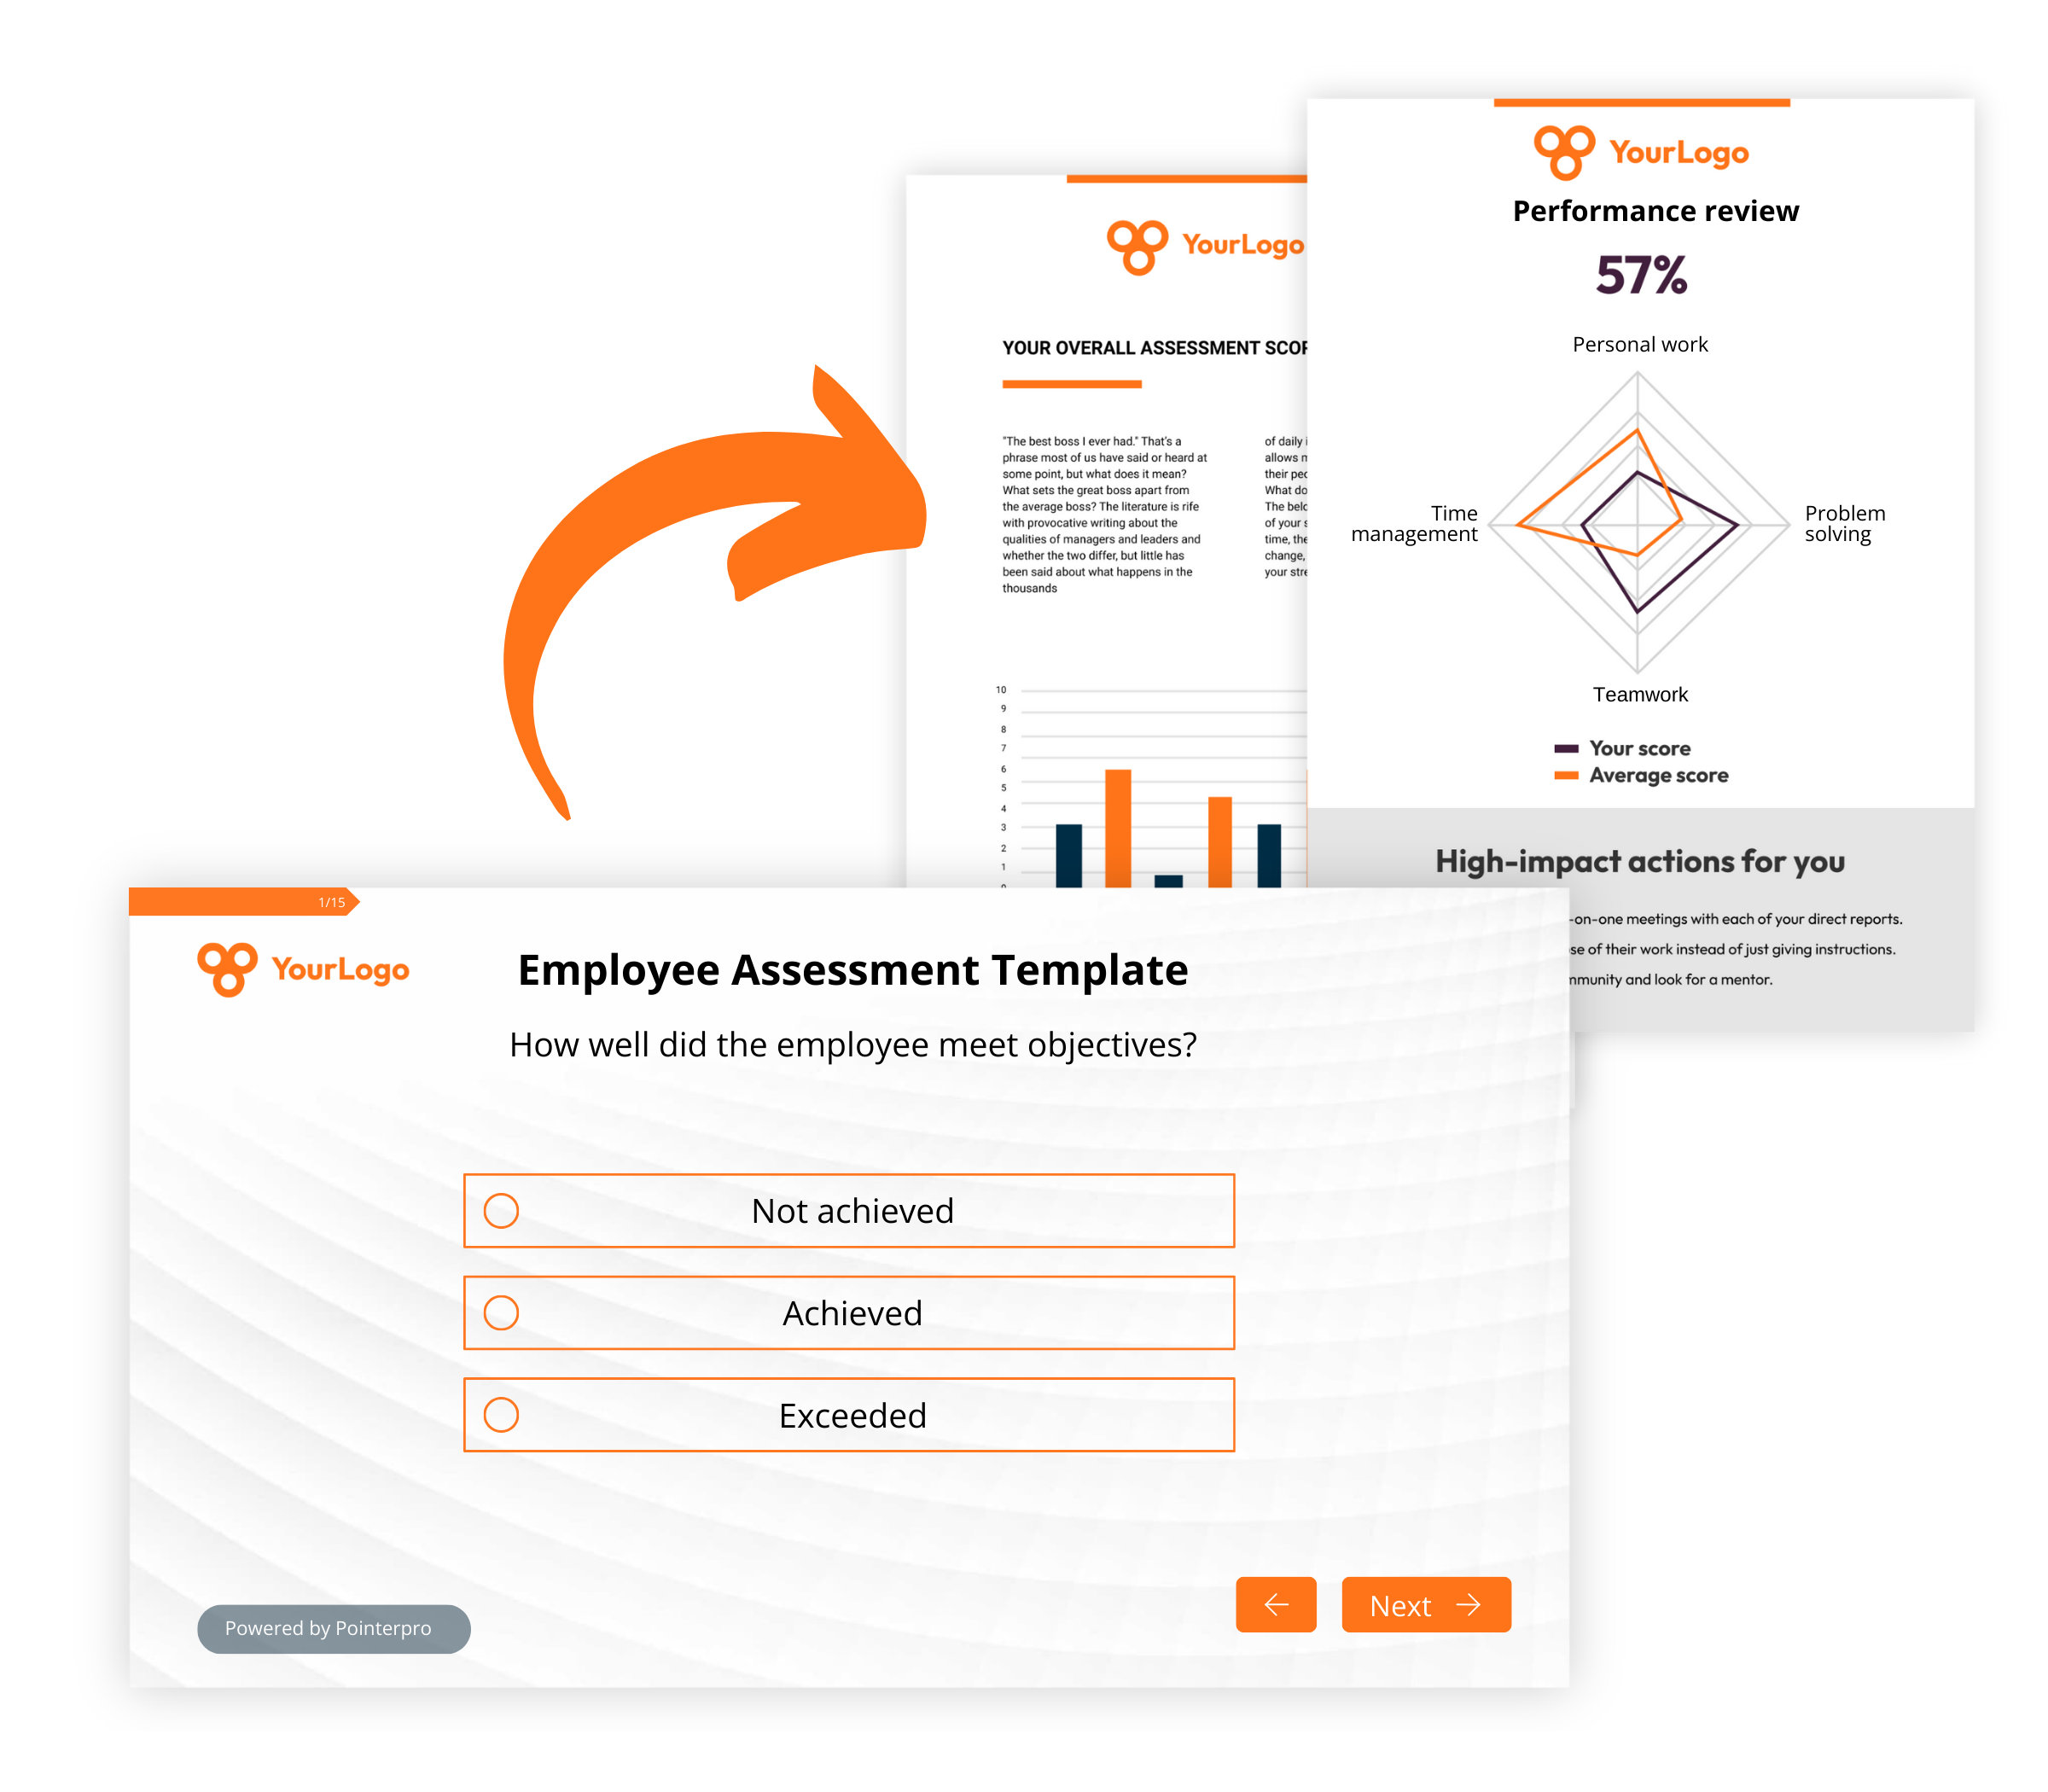 An example of an employee assessment template question and personalized feedback report